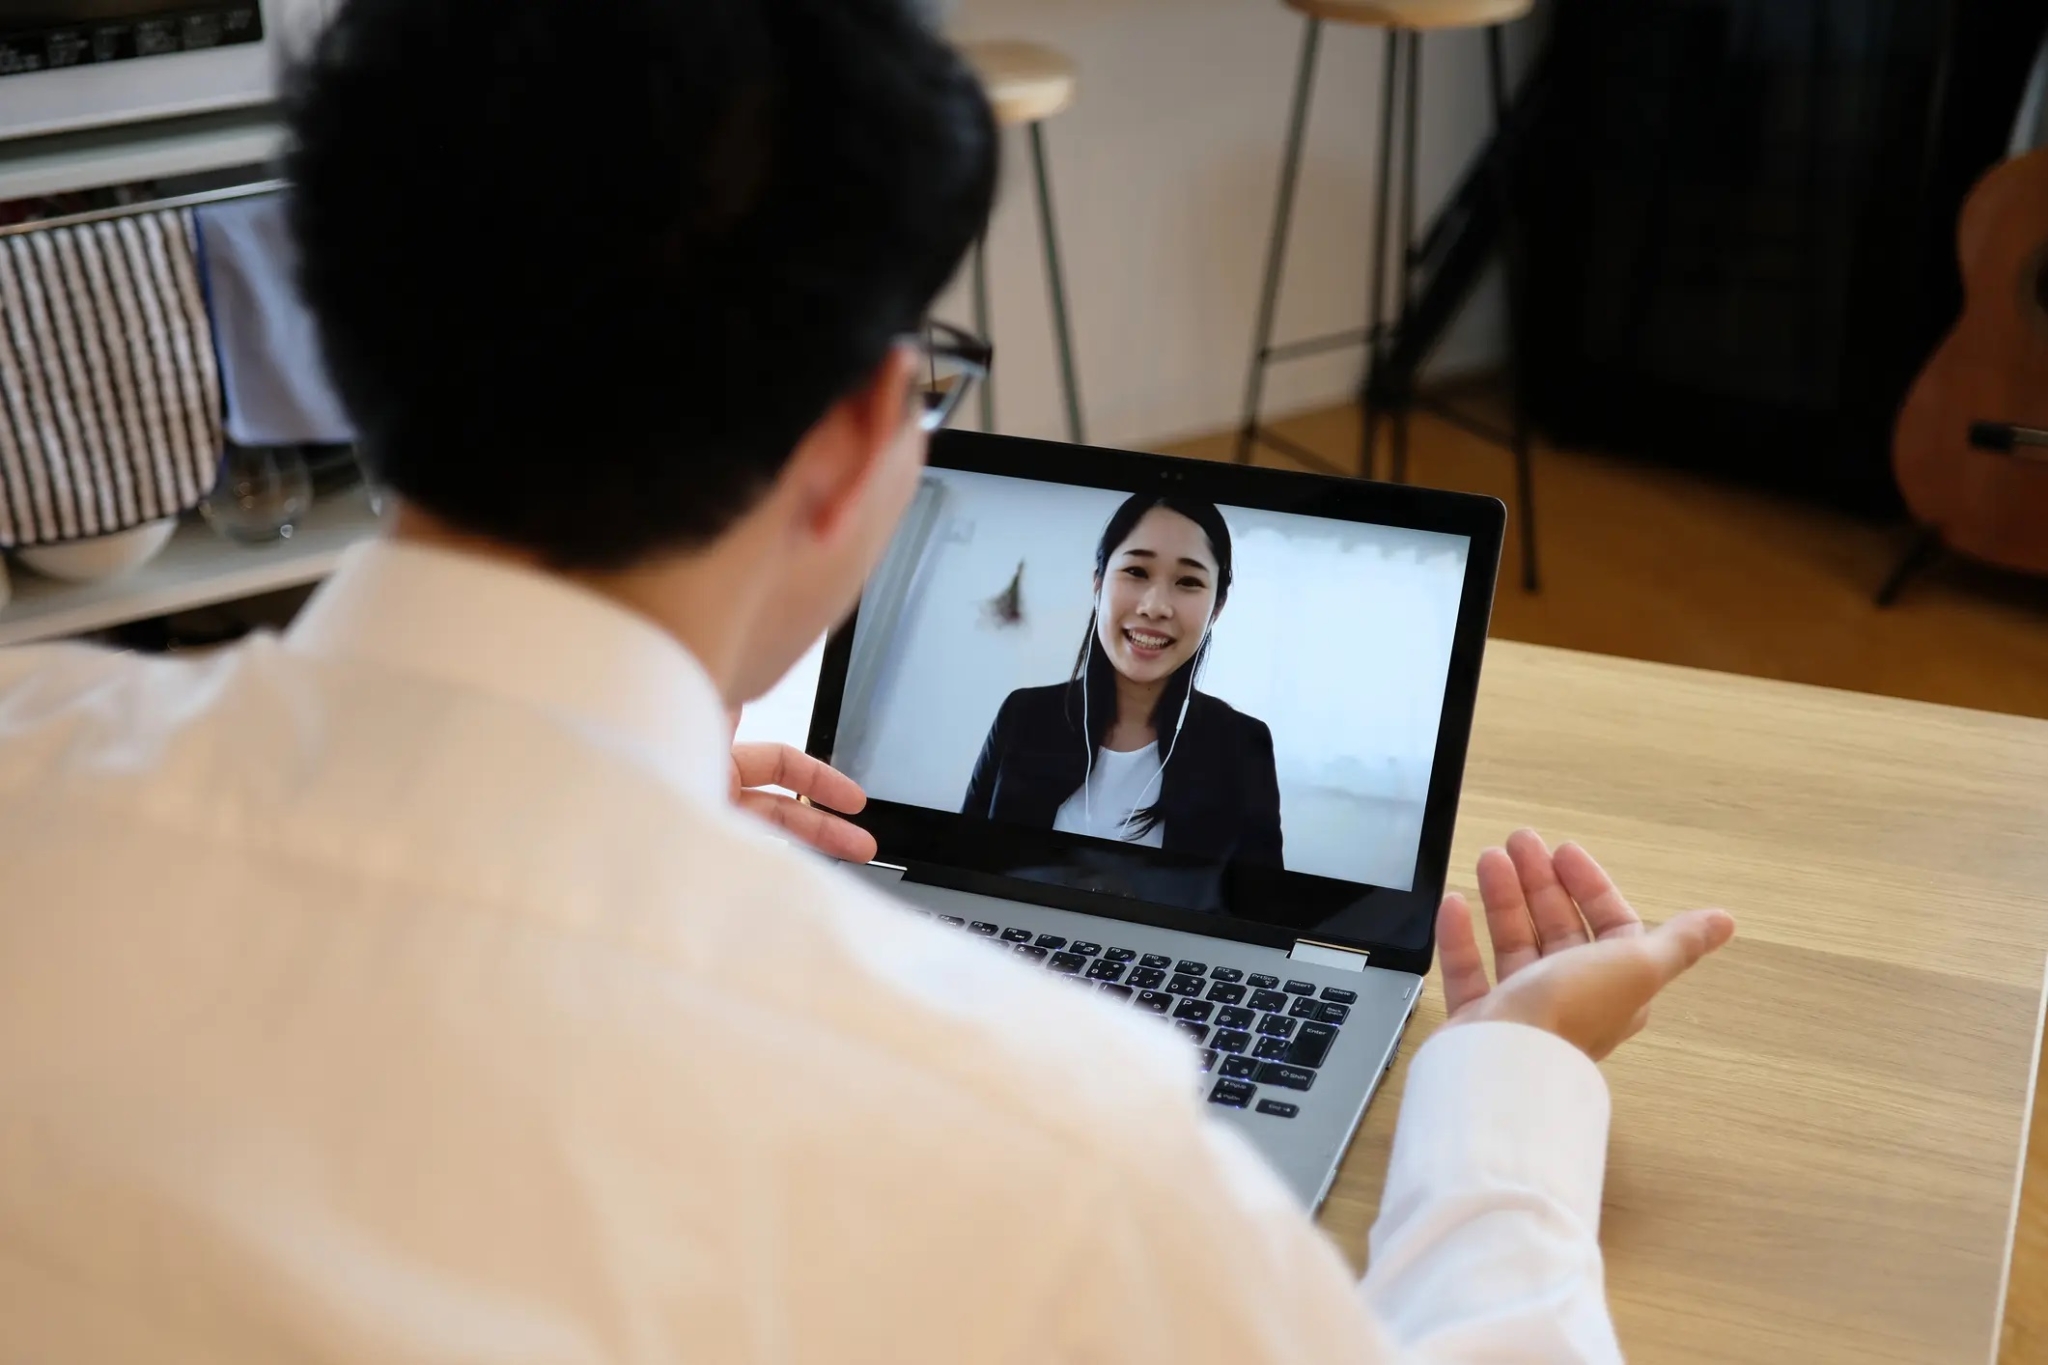 A man speaking to his colleague while on a video call-388